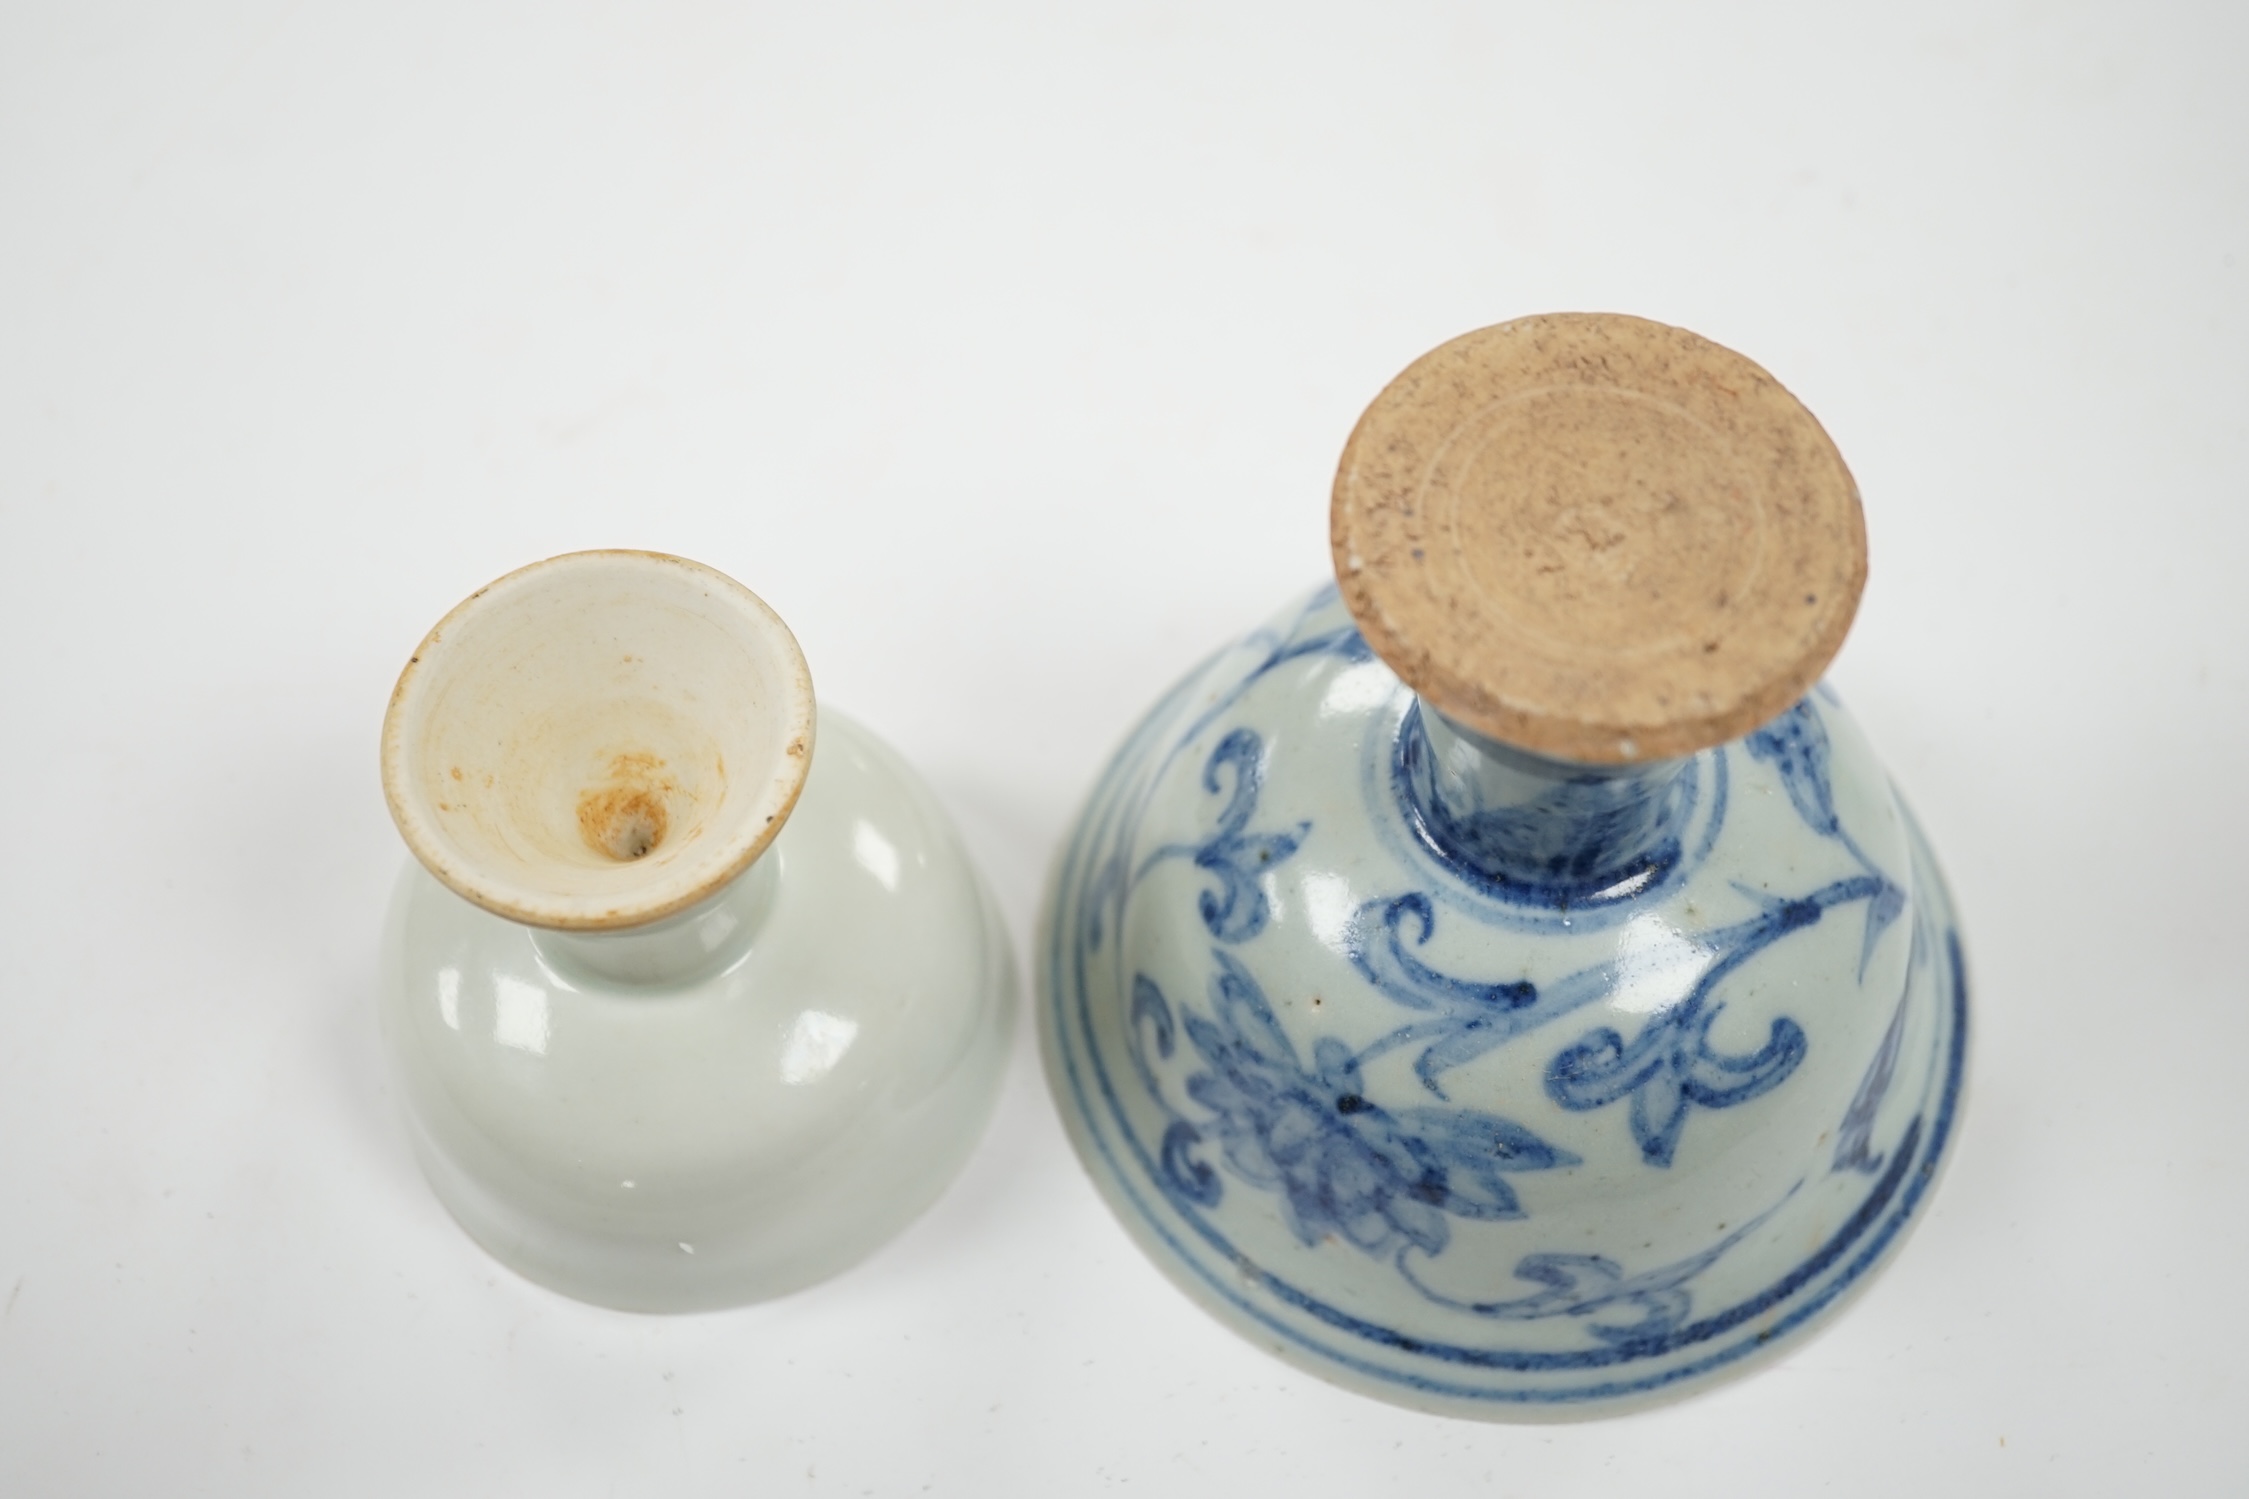 Two Chinese stem cups including a blue and white example, 10.5cm. Condition - fair to good